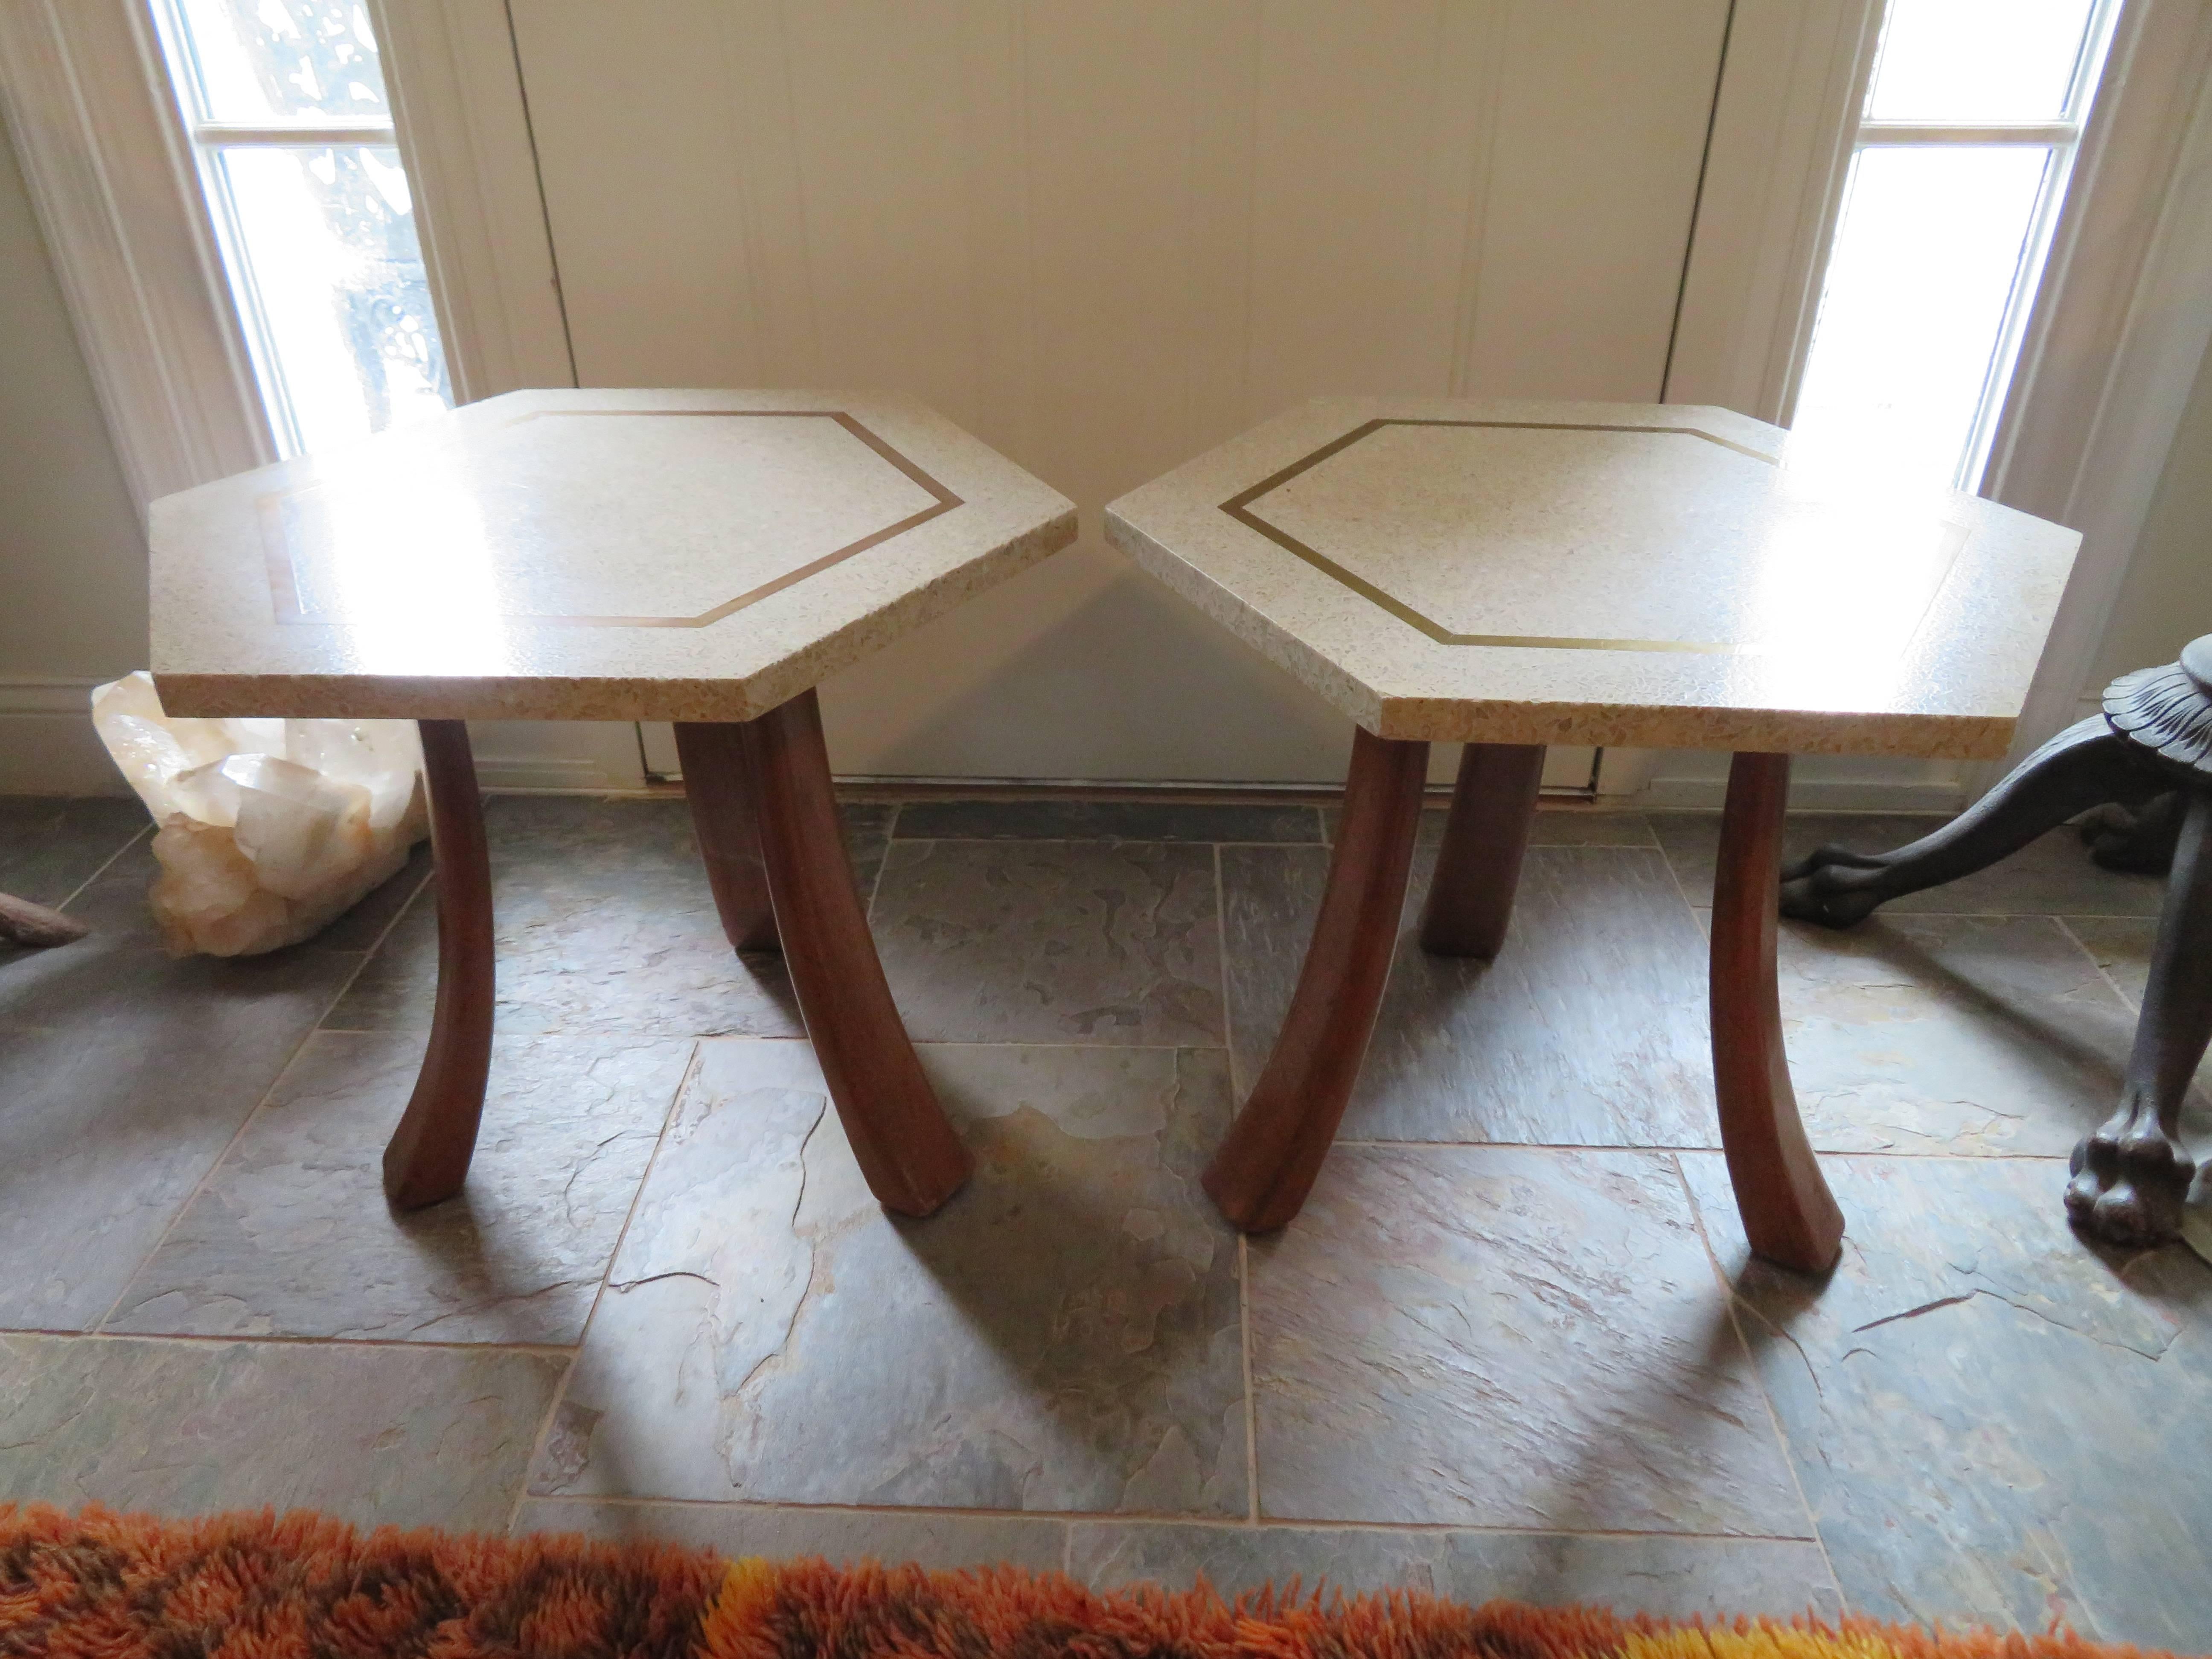 Wonderful pair of three-legged Harvey Probber side or end tables with original hexagonal terrazzo top with inlaid brass. Sculpted bleached mahogany legs with bleached mahogany supports. We do have a single available also if your looking for a set of